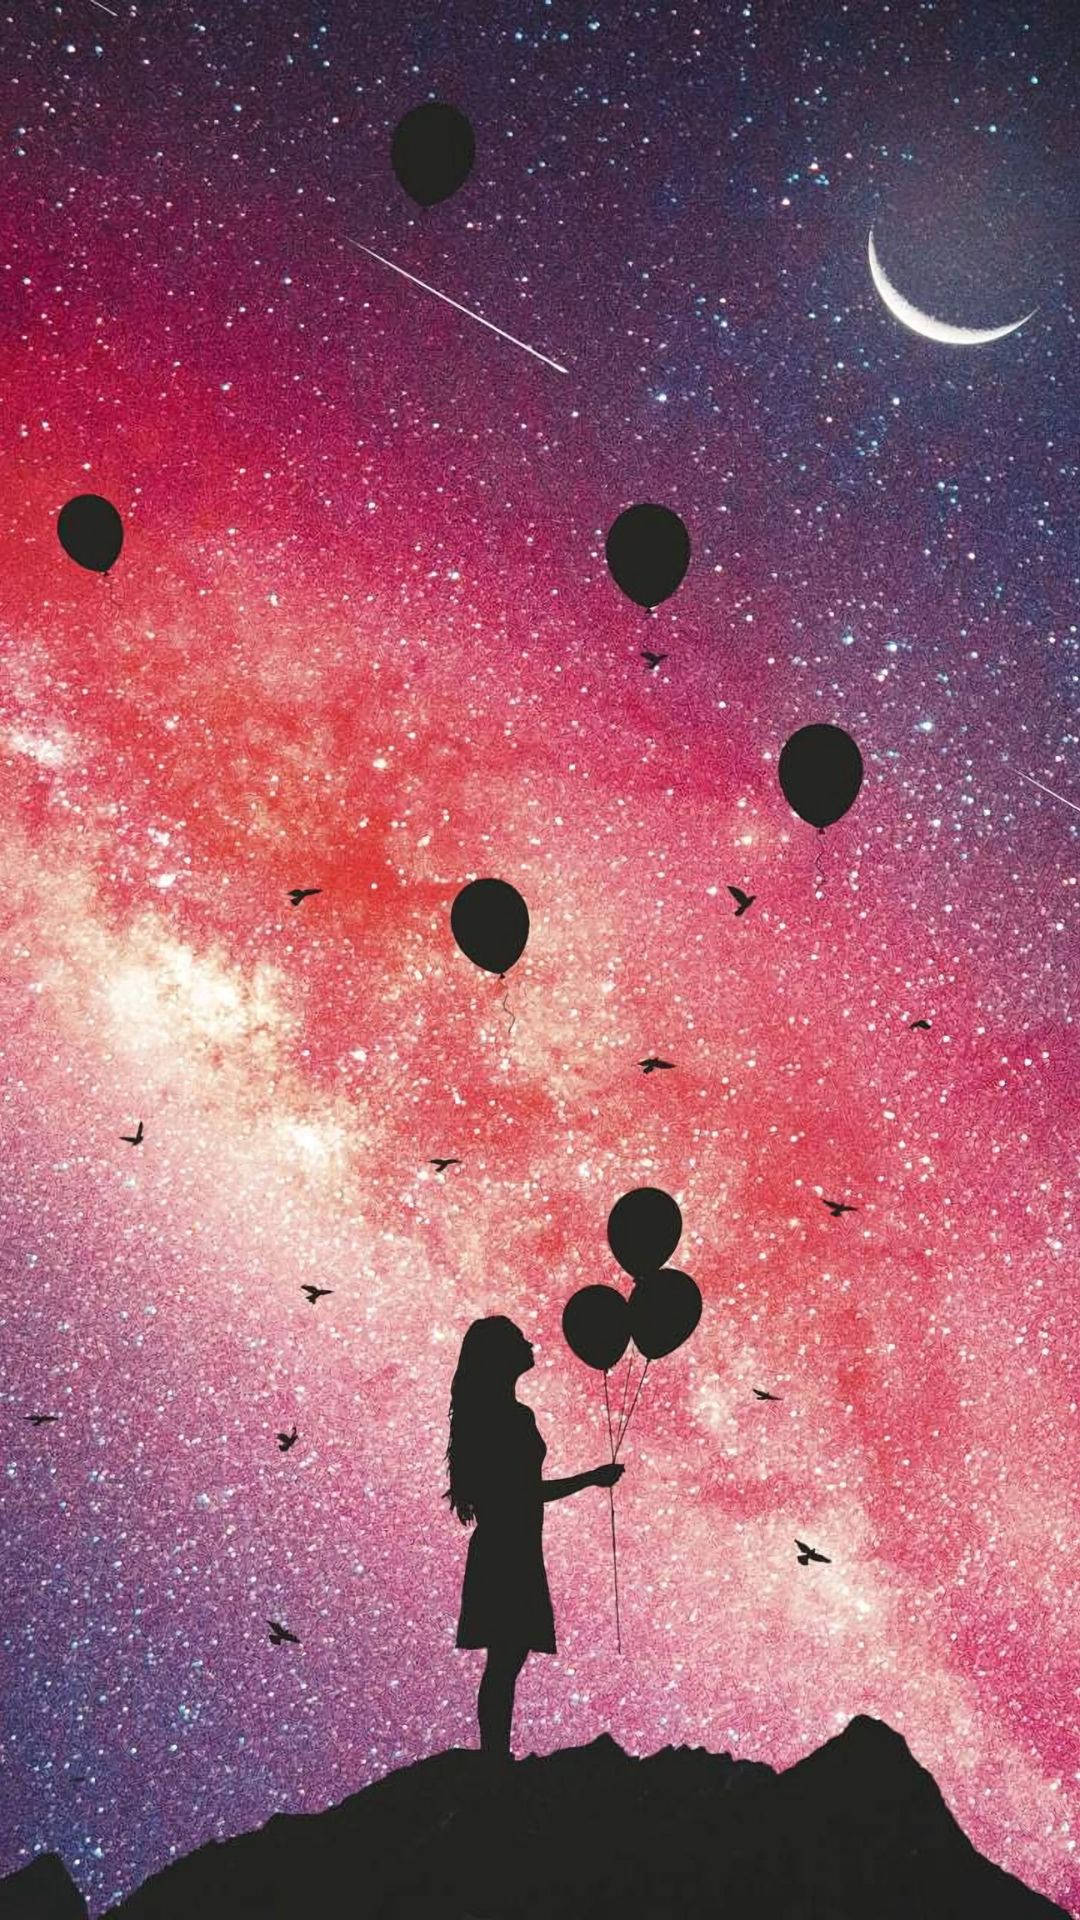 Girl Staring At Balloons In Cute Galaxy Picture